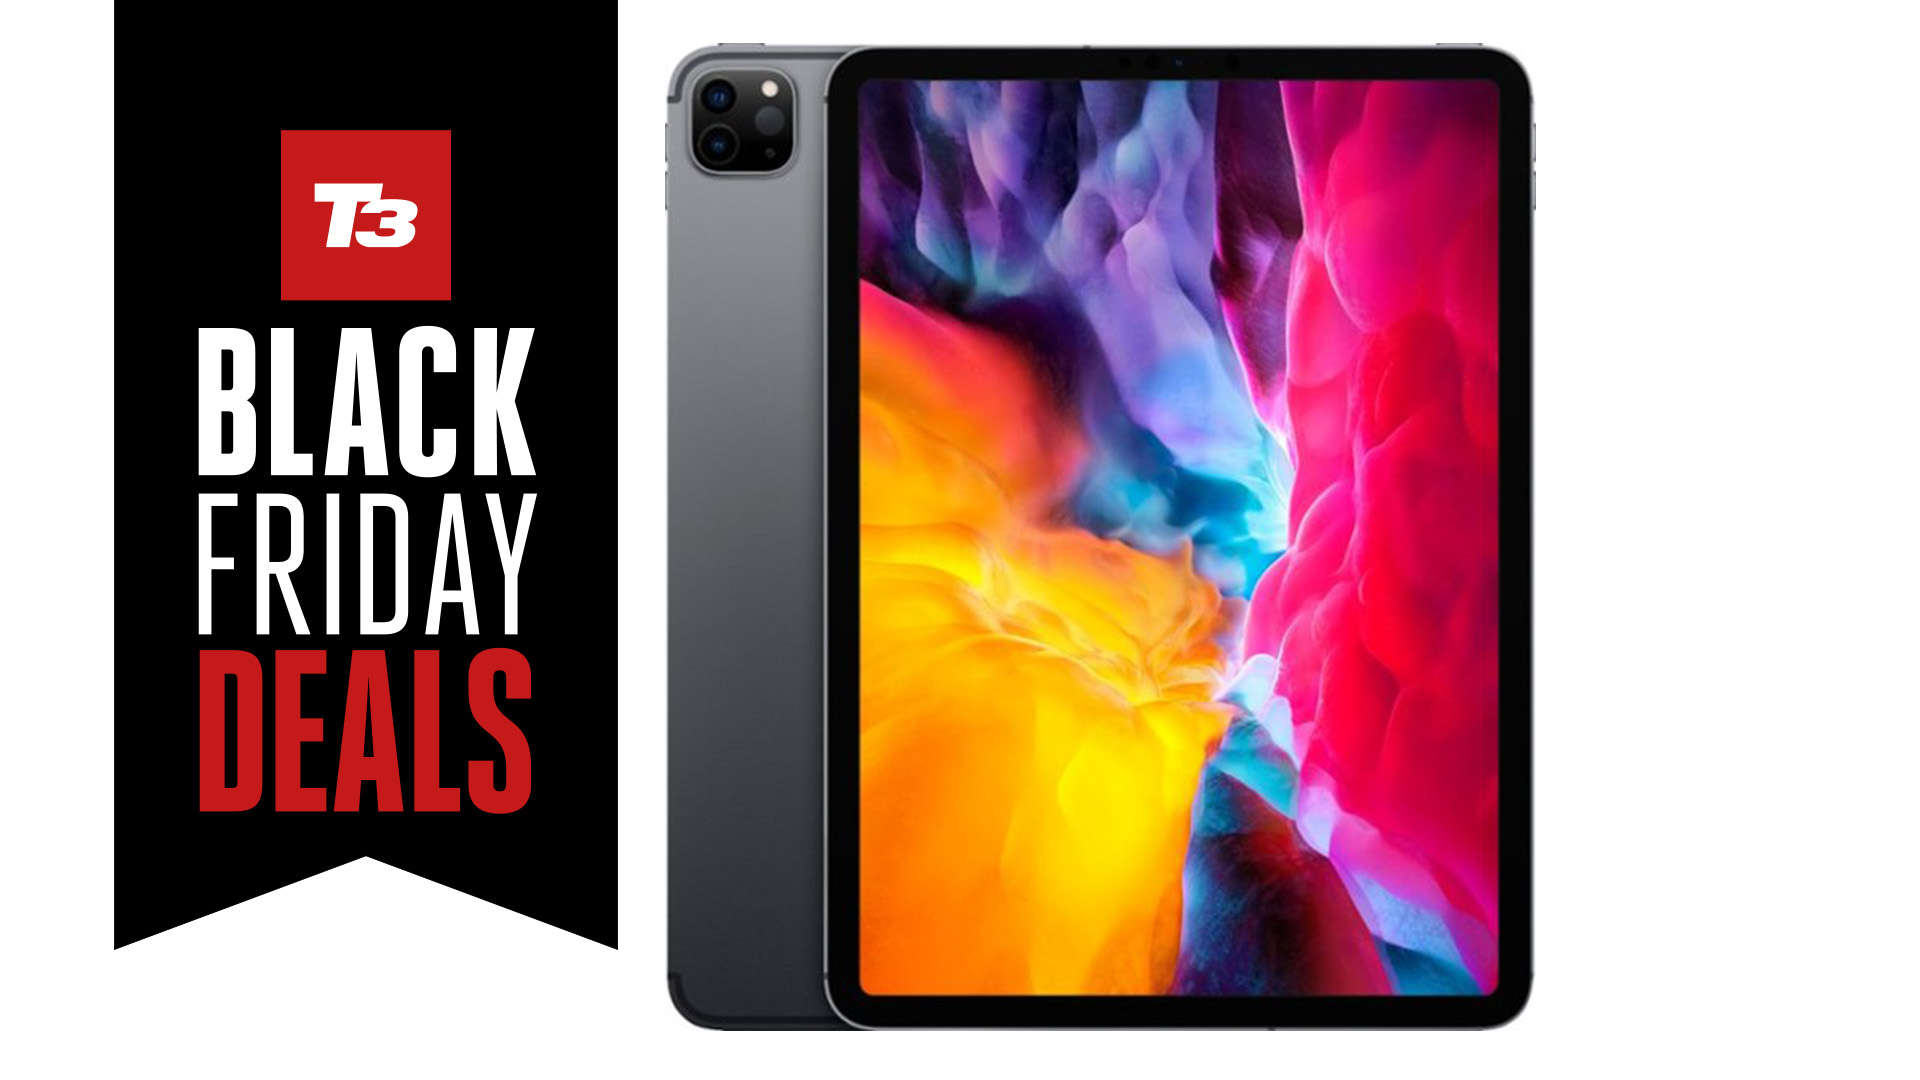 Best Black Friday iPad deals including the iPad mini, air and pro